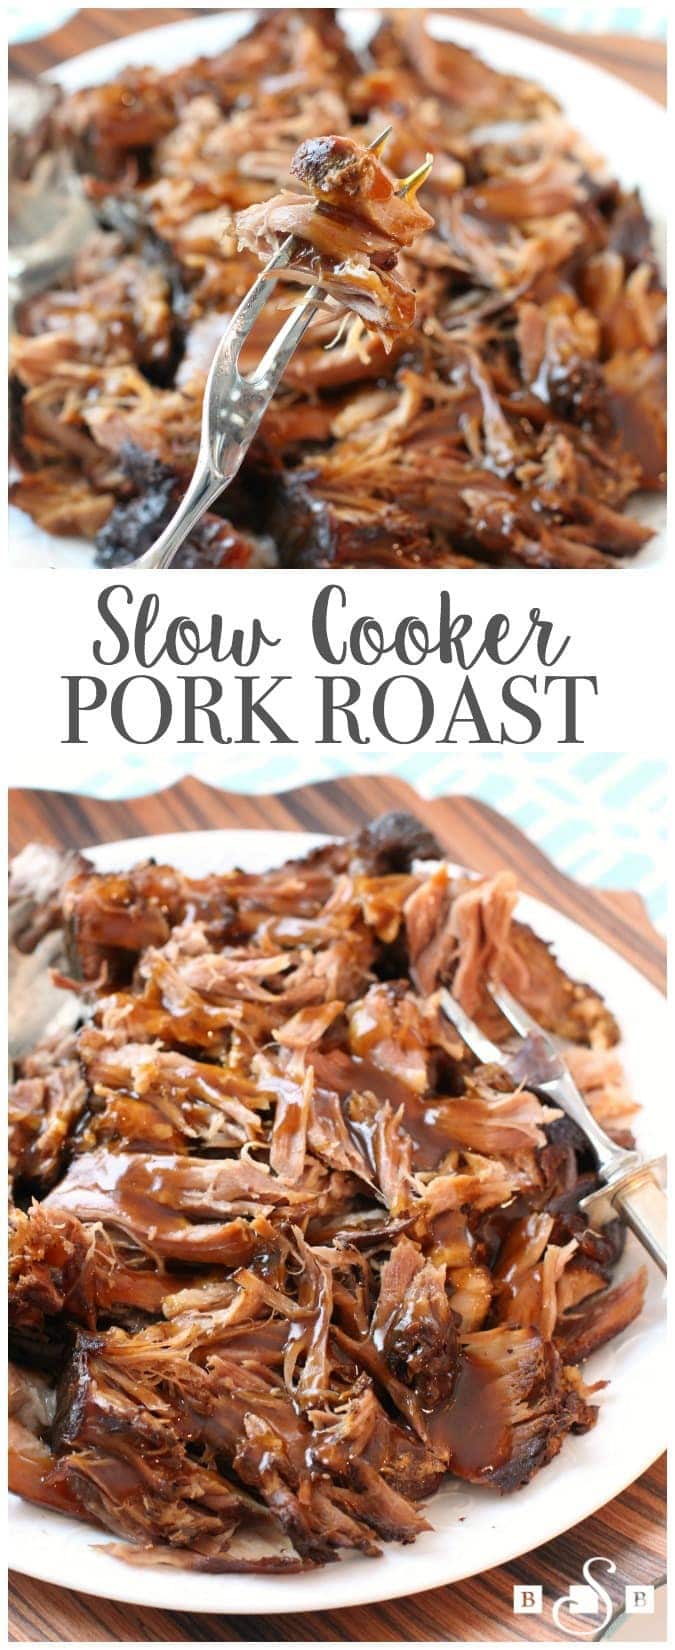 Slow Cooker Pork Roast made with simple ingredients, ready to cook in minutes! Fall-apart tender pork with a flavorful gravy on top make this crock pot pork recipe amazing. Now with Instant Pot instructions!